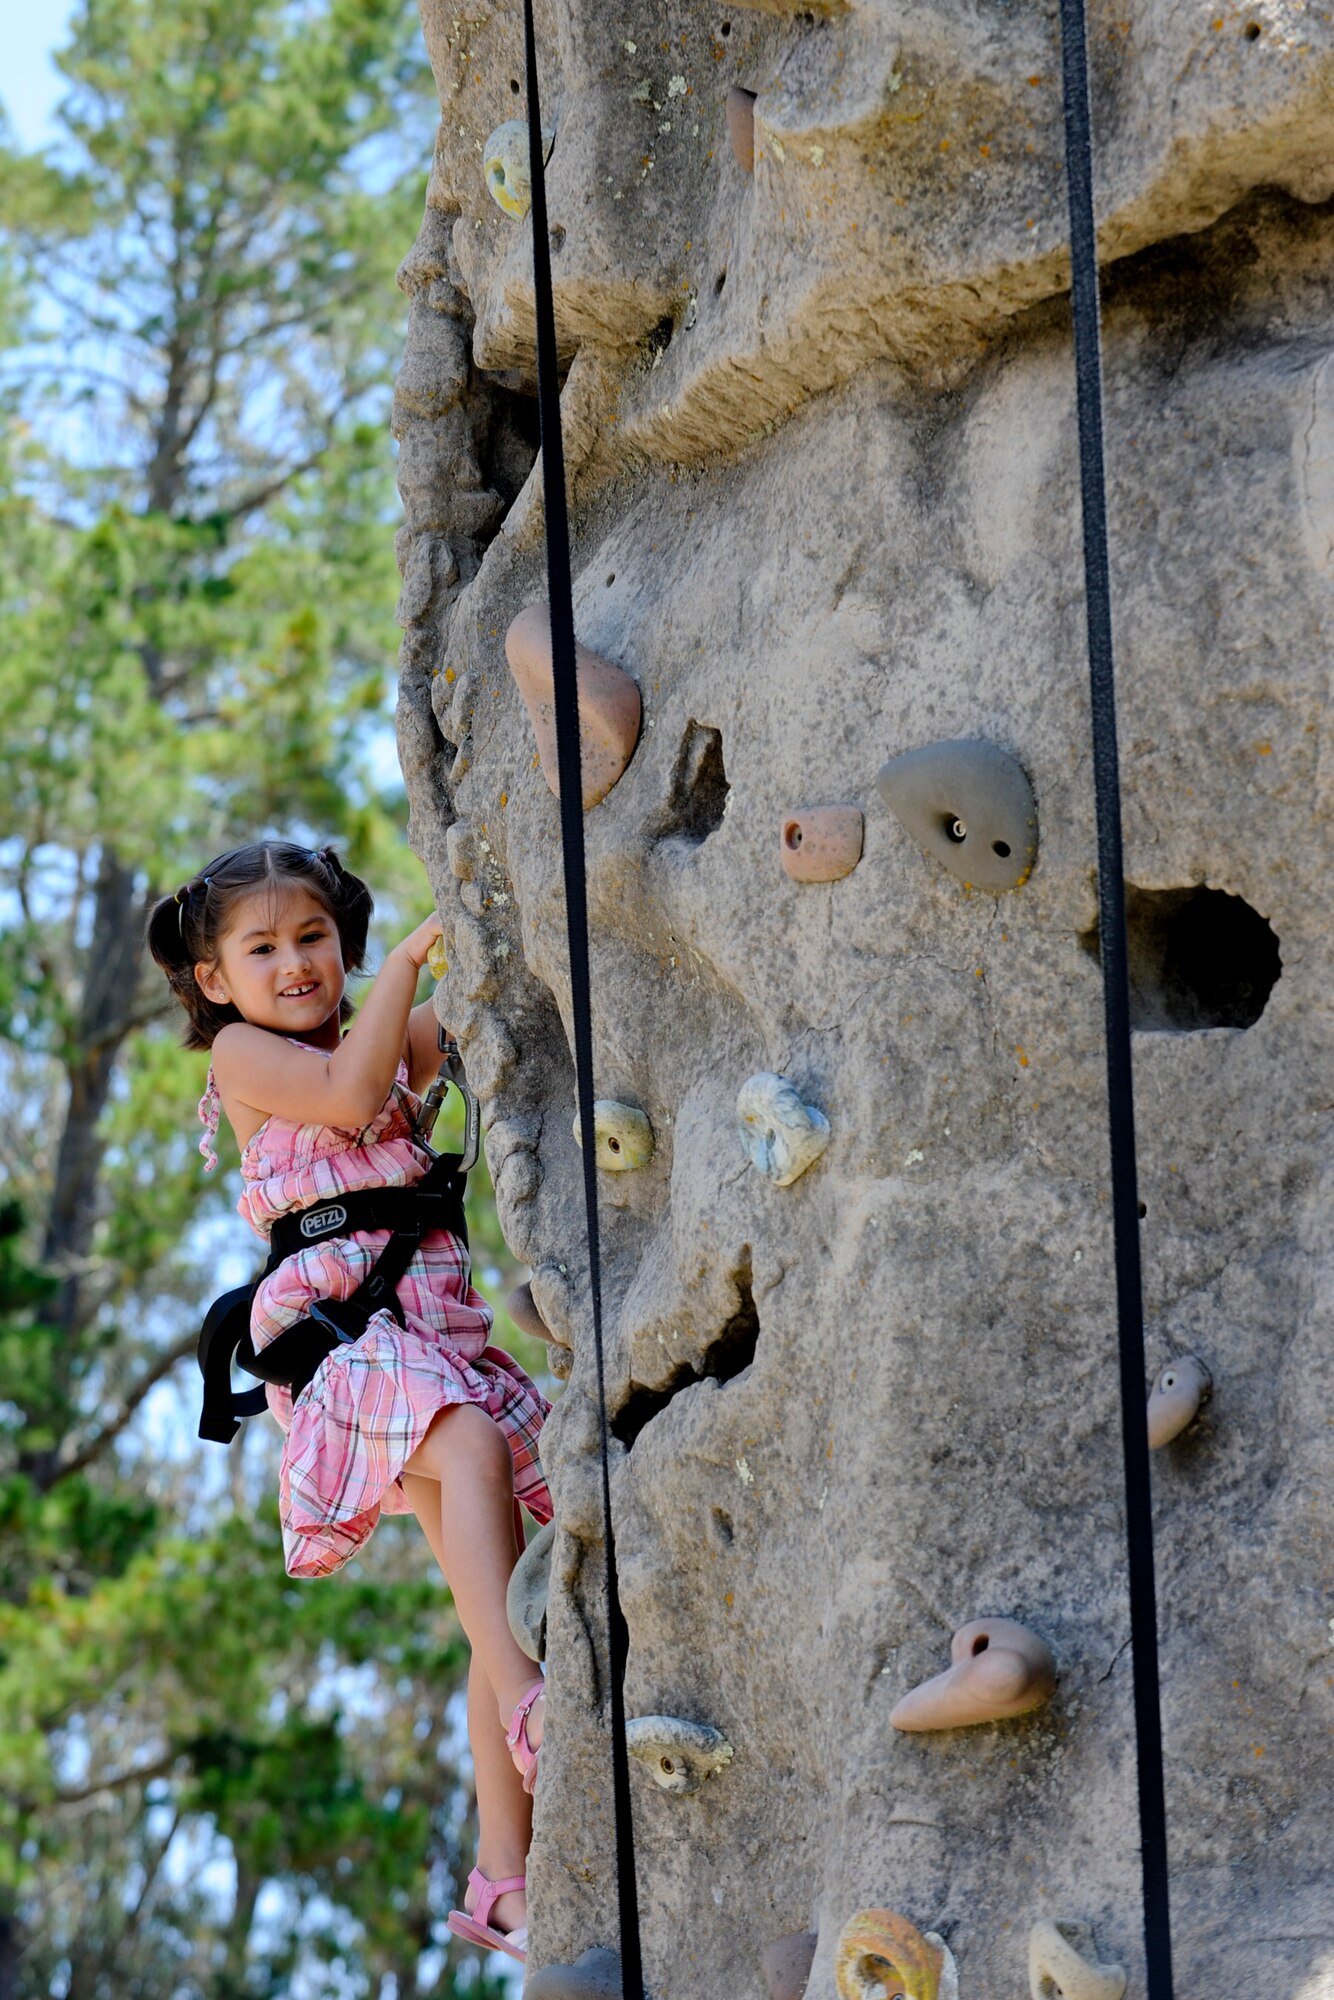 VANDENBERG AIR FORCE BASE, Calif. -- Layla Chavez, daughter of Nicole Chavez and Master Sgt. Ulysses Chavez, 614th Air Operations Center, climbs a rock wall during Vandenberg's Independence Day celebration here July 7, 2012.More than 1200 Team V members came to base to celebrate their nations independence. (U.S. Air Force photo/Staff Sgt. Levi Riendeau)
